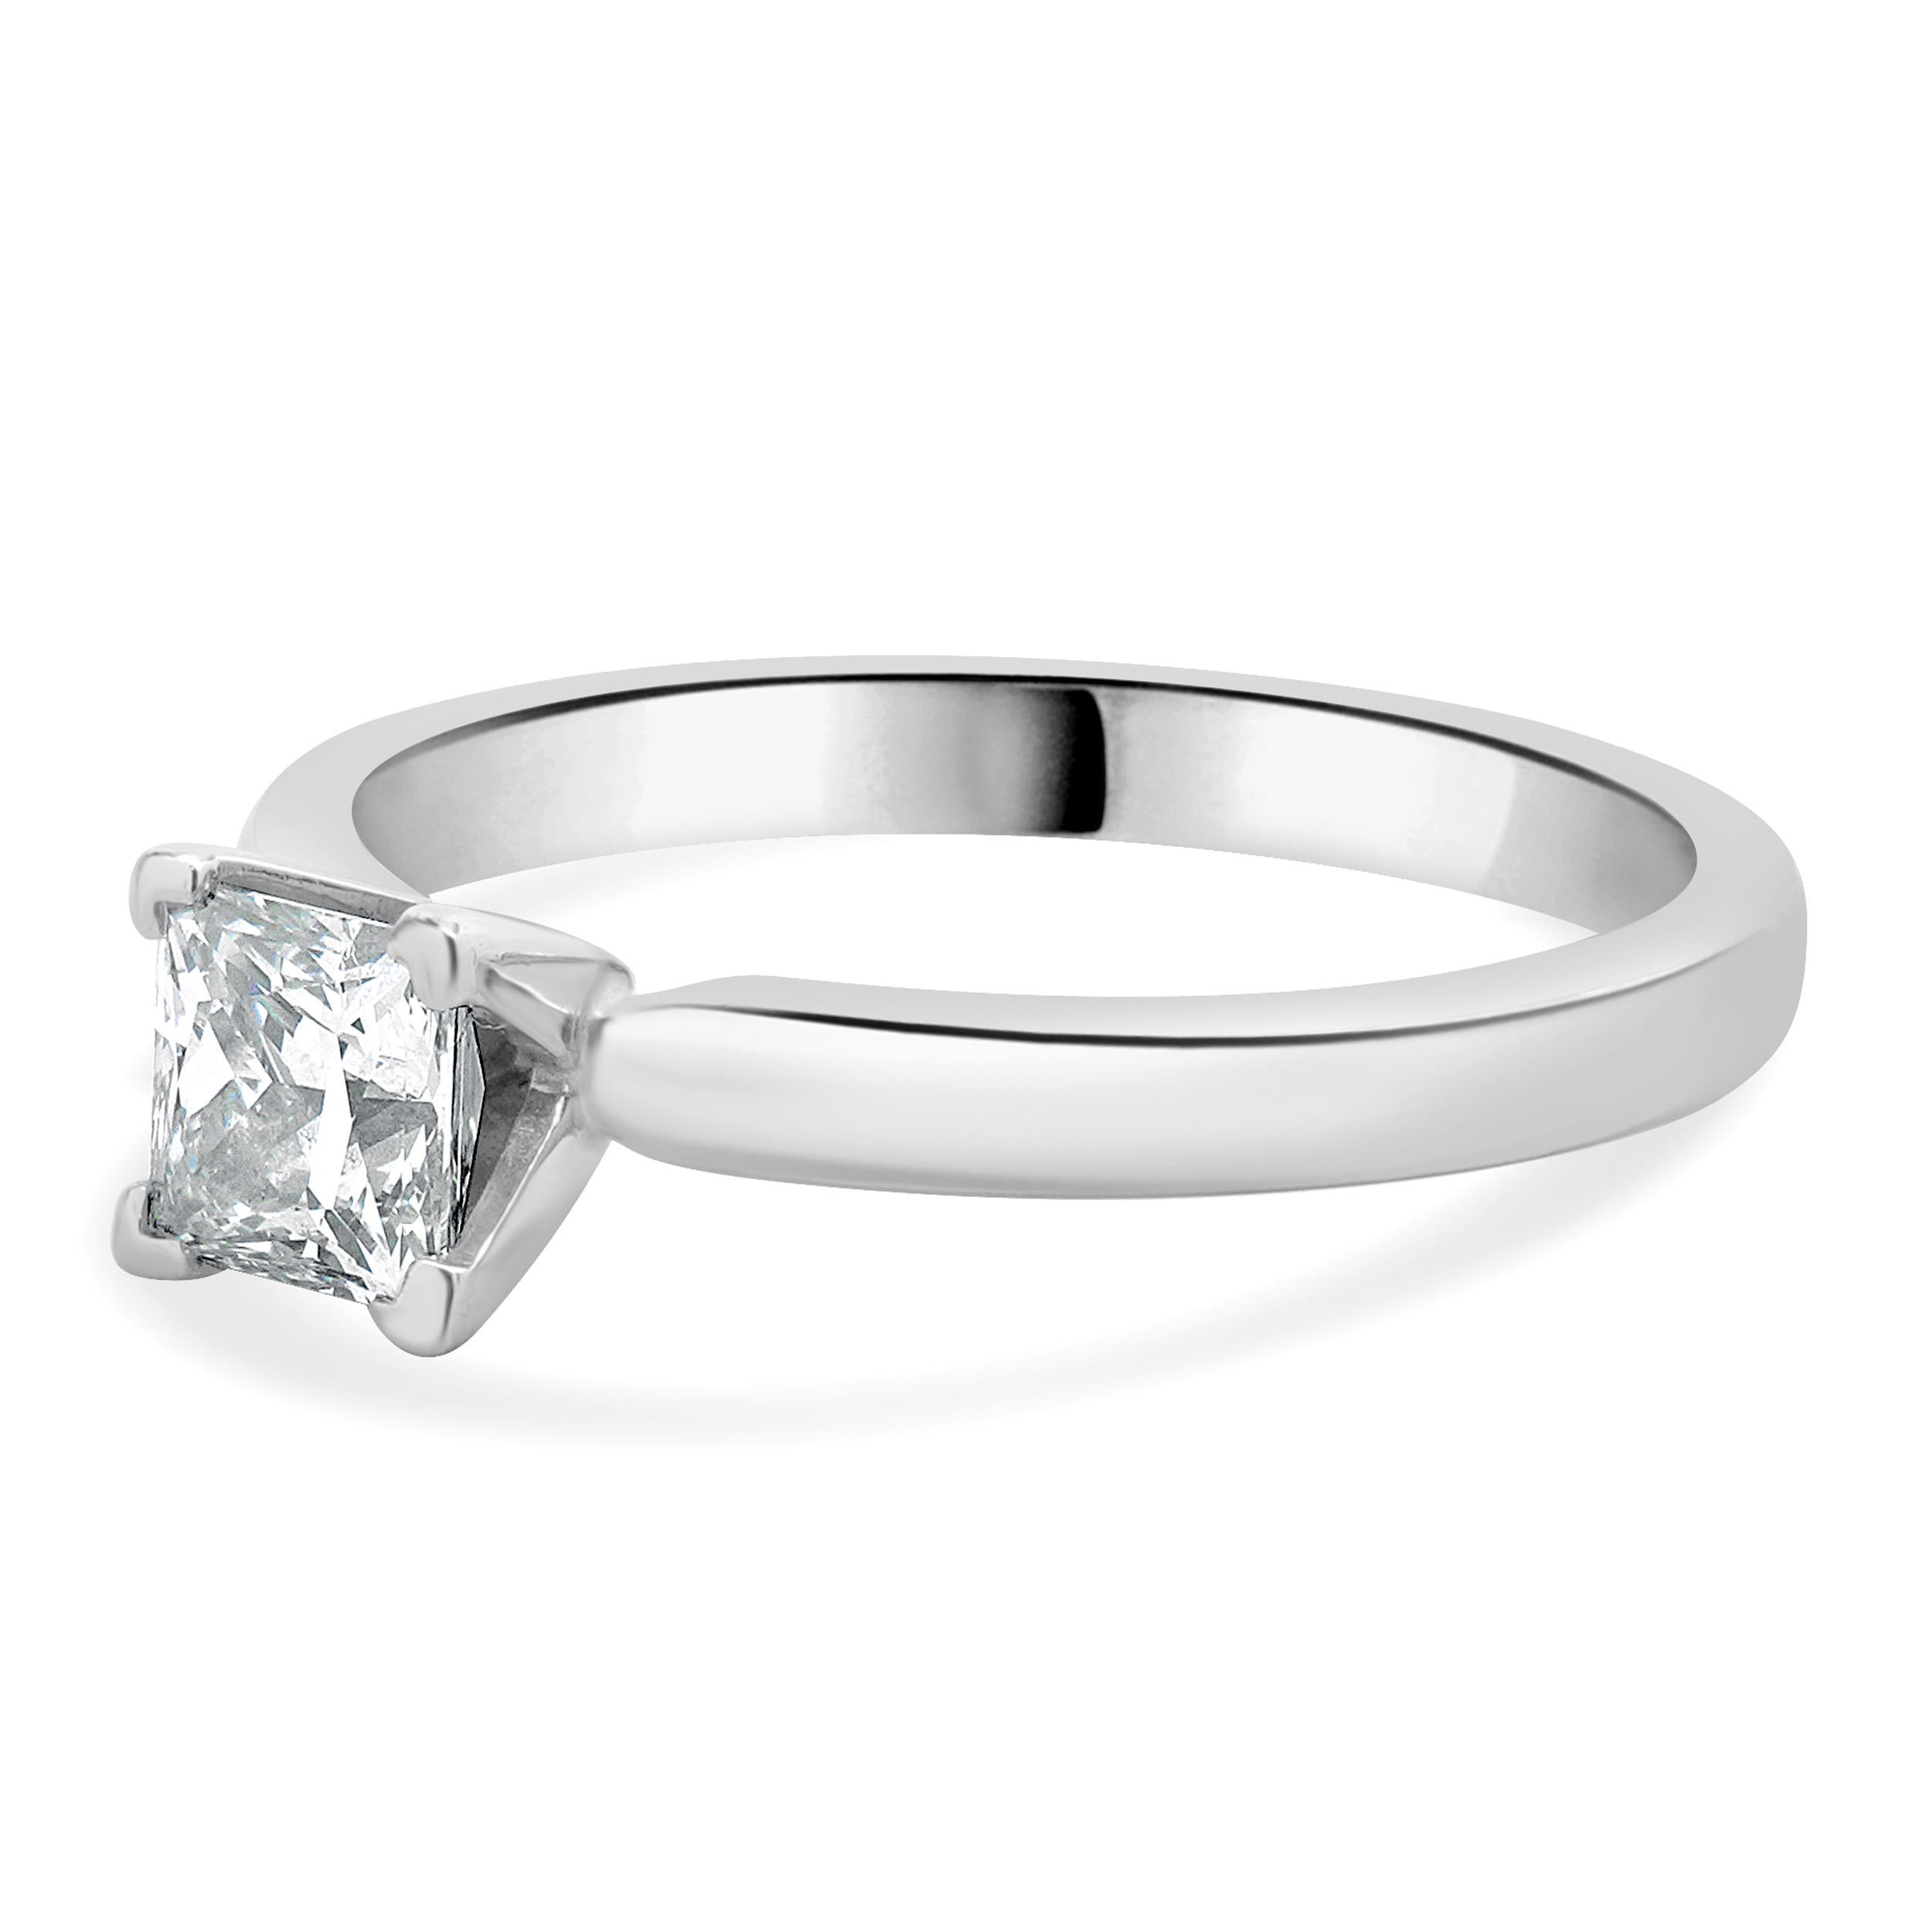 Designer: custom
Material: 14K white gold
Center Diamond: 1 princess cut = 0.83ct
Color : I
Clarity : VS2
AGS: 0009498603
Dimensions: ring top measures 5.5mm
Size: 8 complimentary sizing available 
Weight: 4.57 grams
